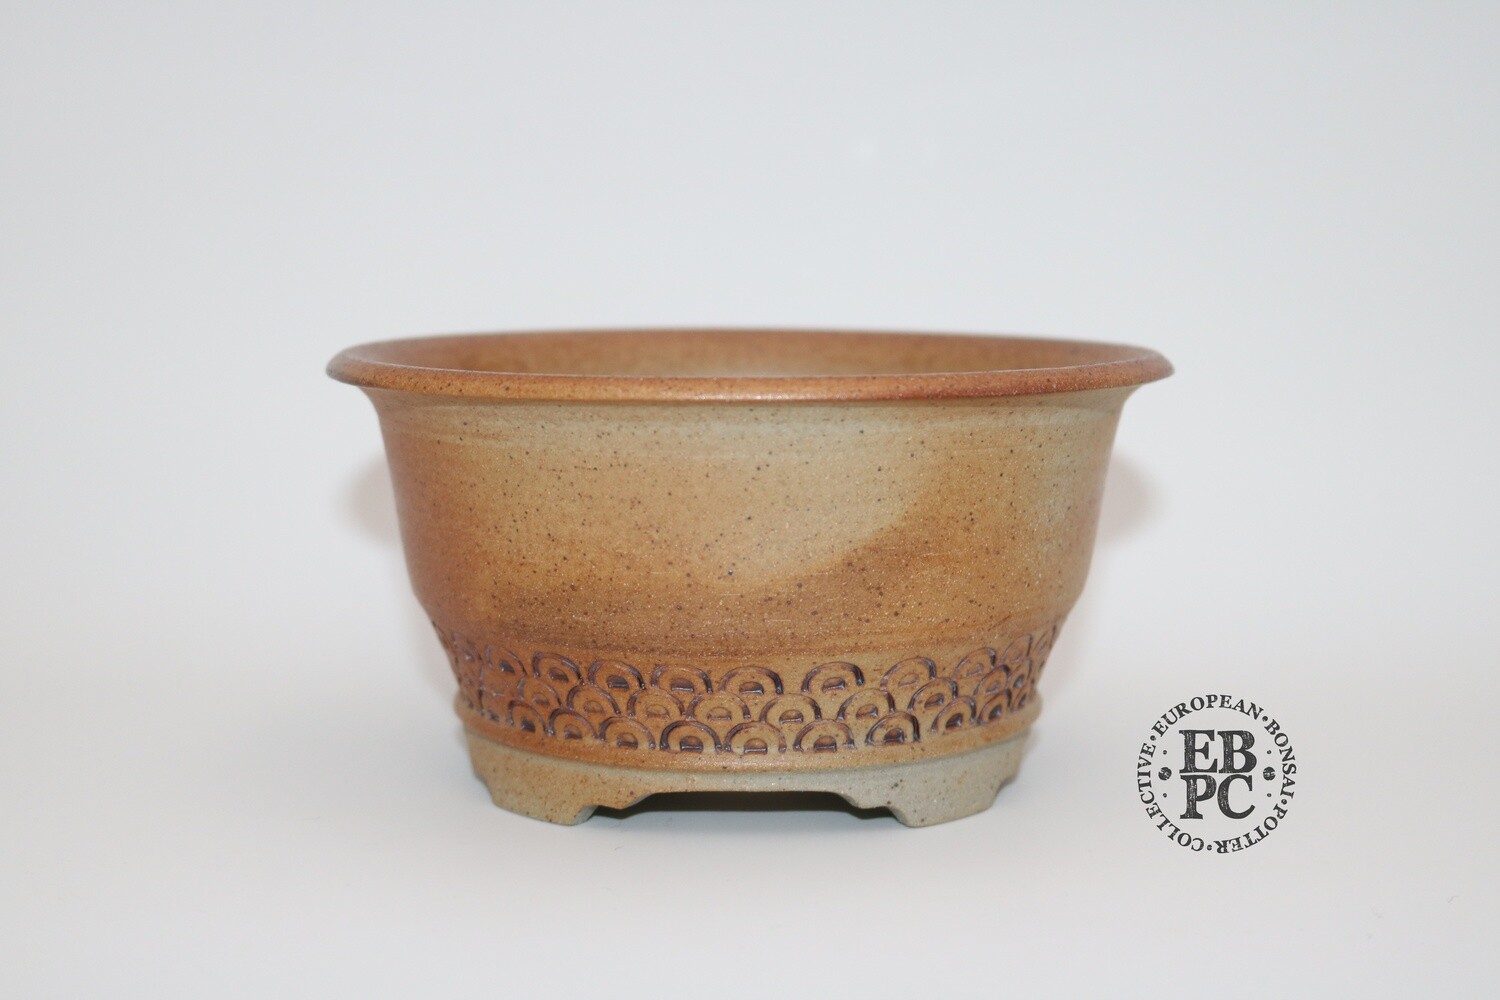 Gramming Pots - 15cm; Incised wave pattern; Round; Unglazed; Light Clay; Varied Hues of Brown; Wood-fired; Tomas Gramming